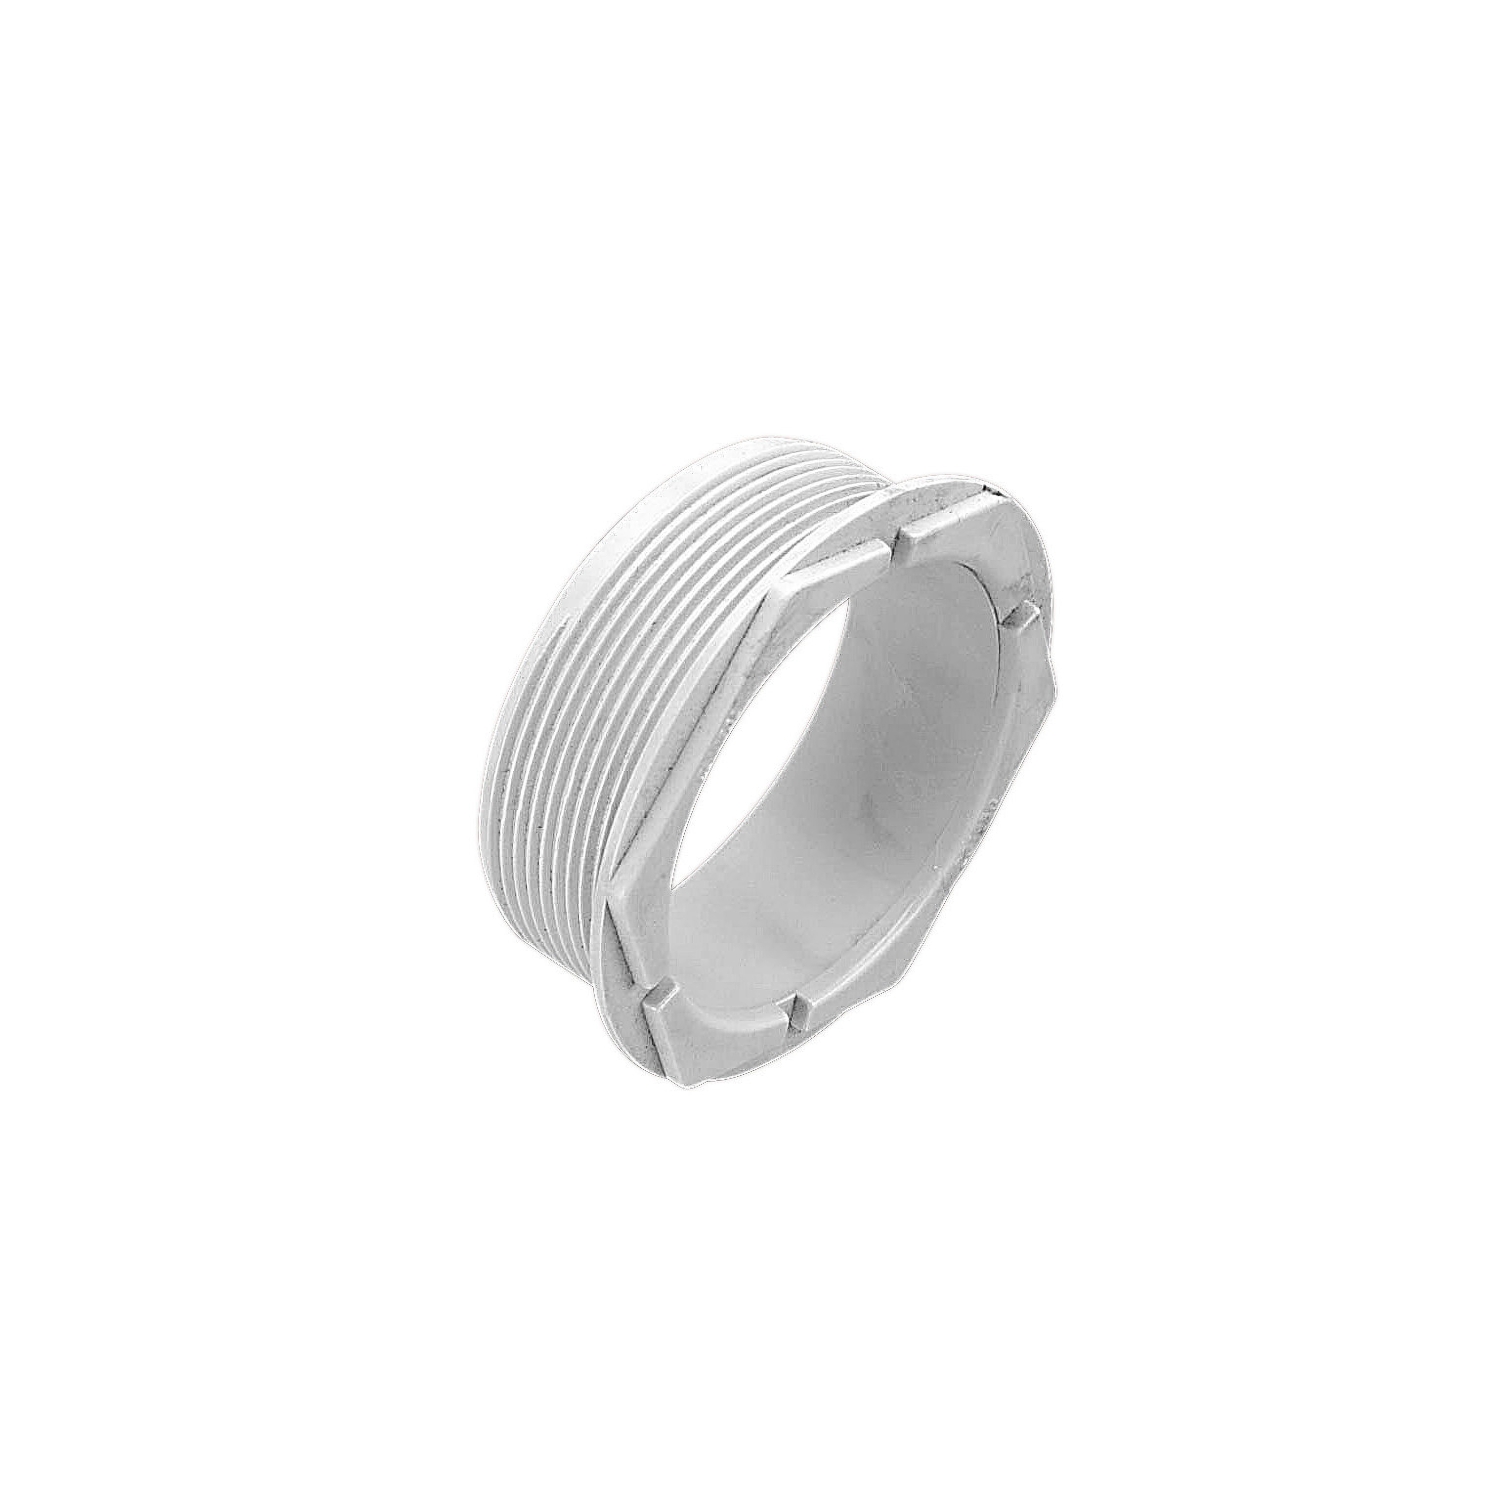 Solid Fittings - PVC, Male Bushes, 32mm, Grey